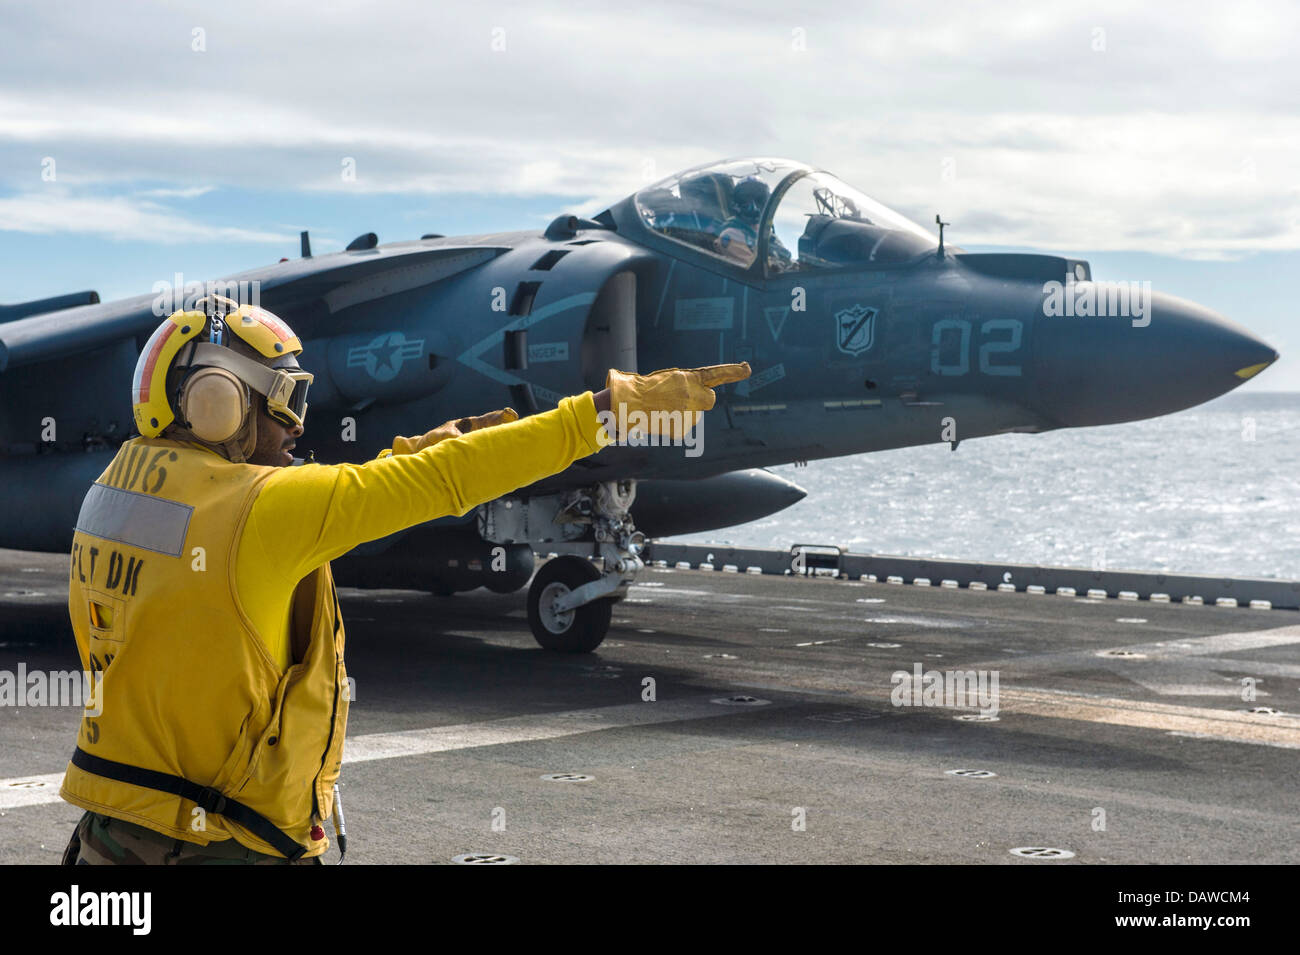 A US Navy Aviation Boatswains Mate signals to the pilot of an AV-8B Harrier fighter aircraft that he is cleared for launch from the flight deck of the amphibious assault ship USS Bonhomme Richard July 16, 2013 in the Coral Sea. Stock Photo